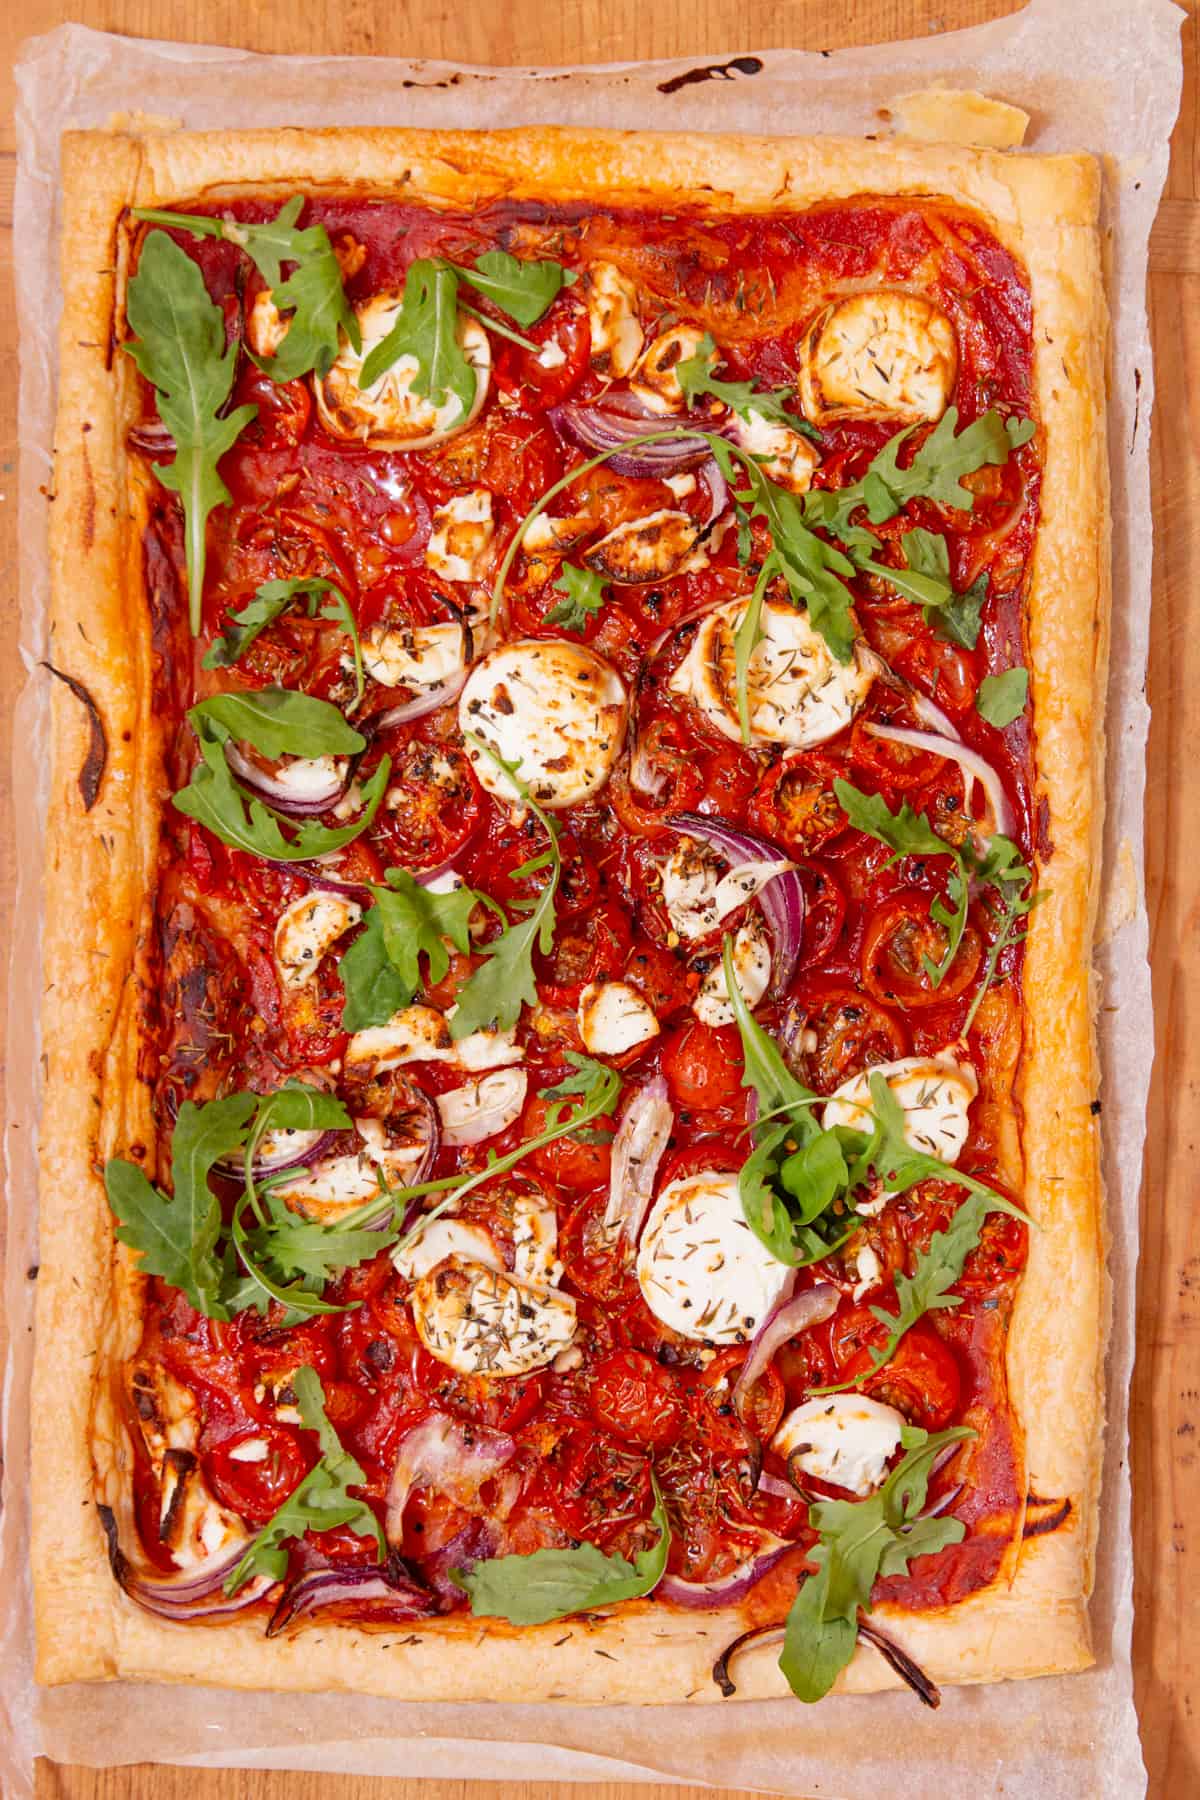 Rectangular, large goat's cheese tart with tomatoes and topped with rocket and red onion slices laid out on parchment paper on a wooden board.